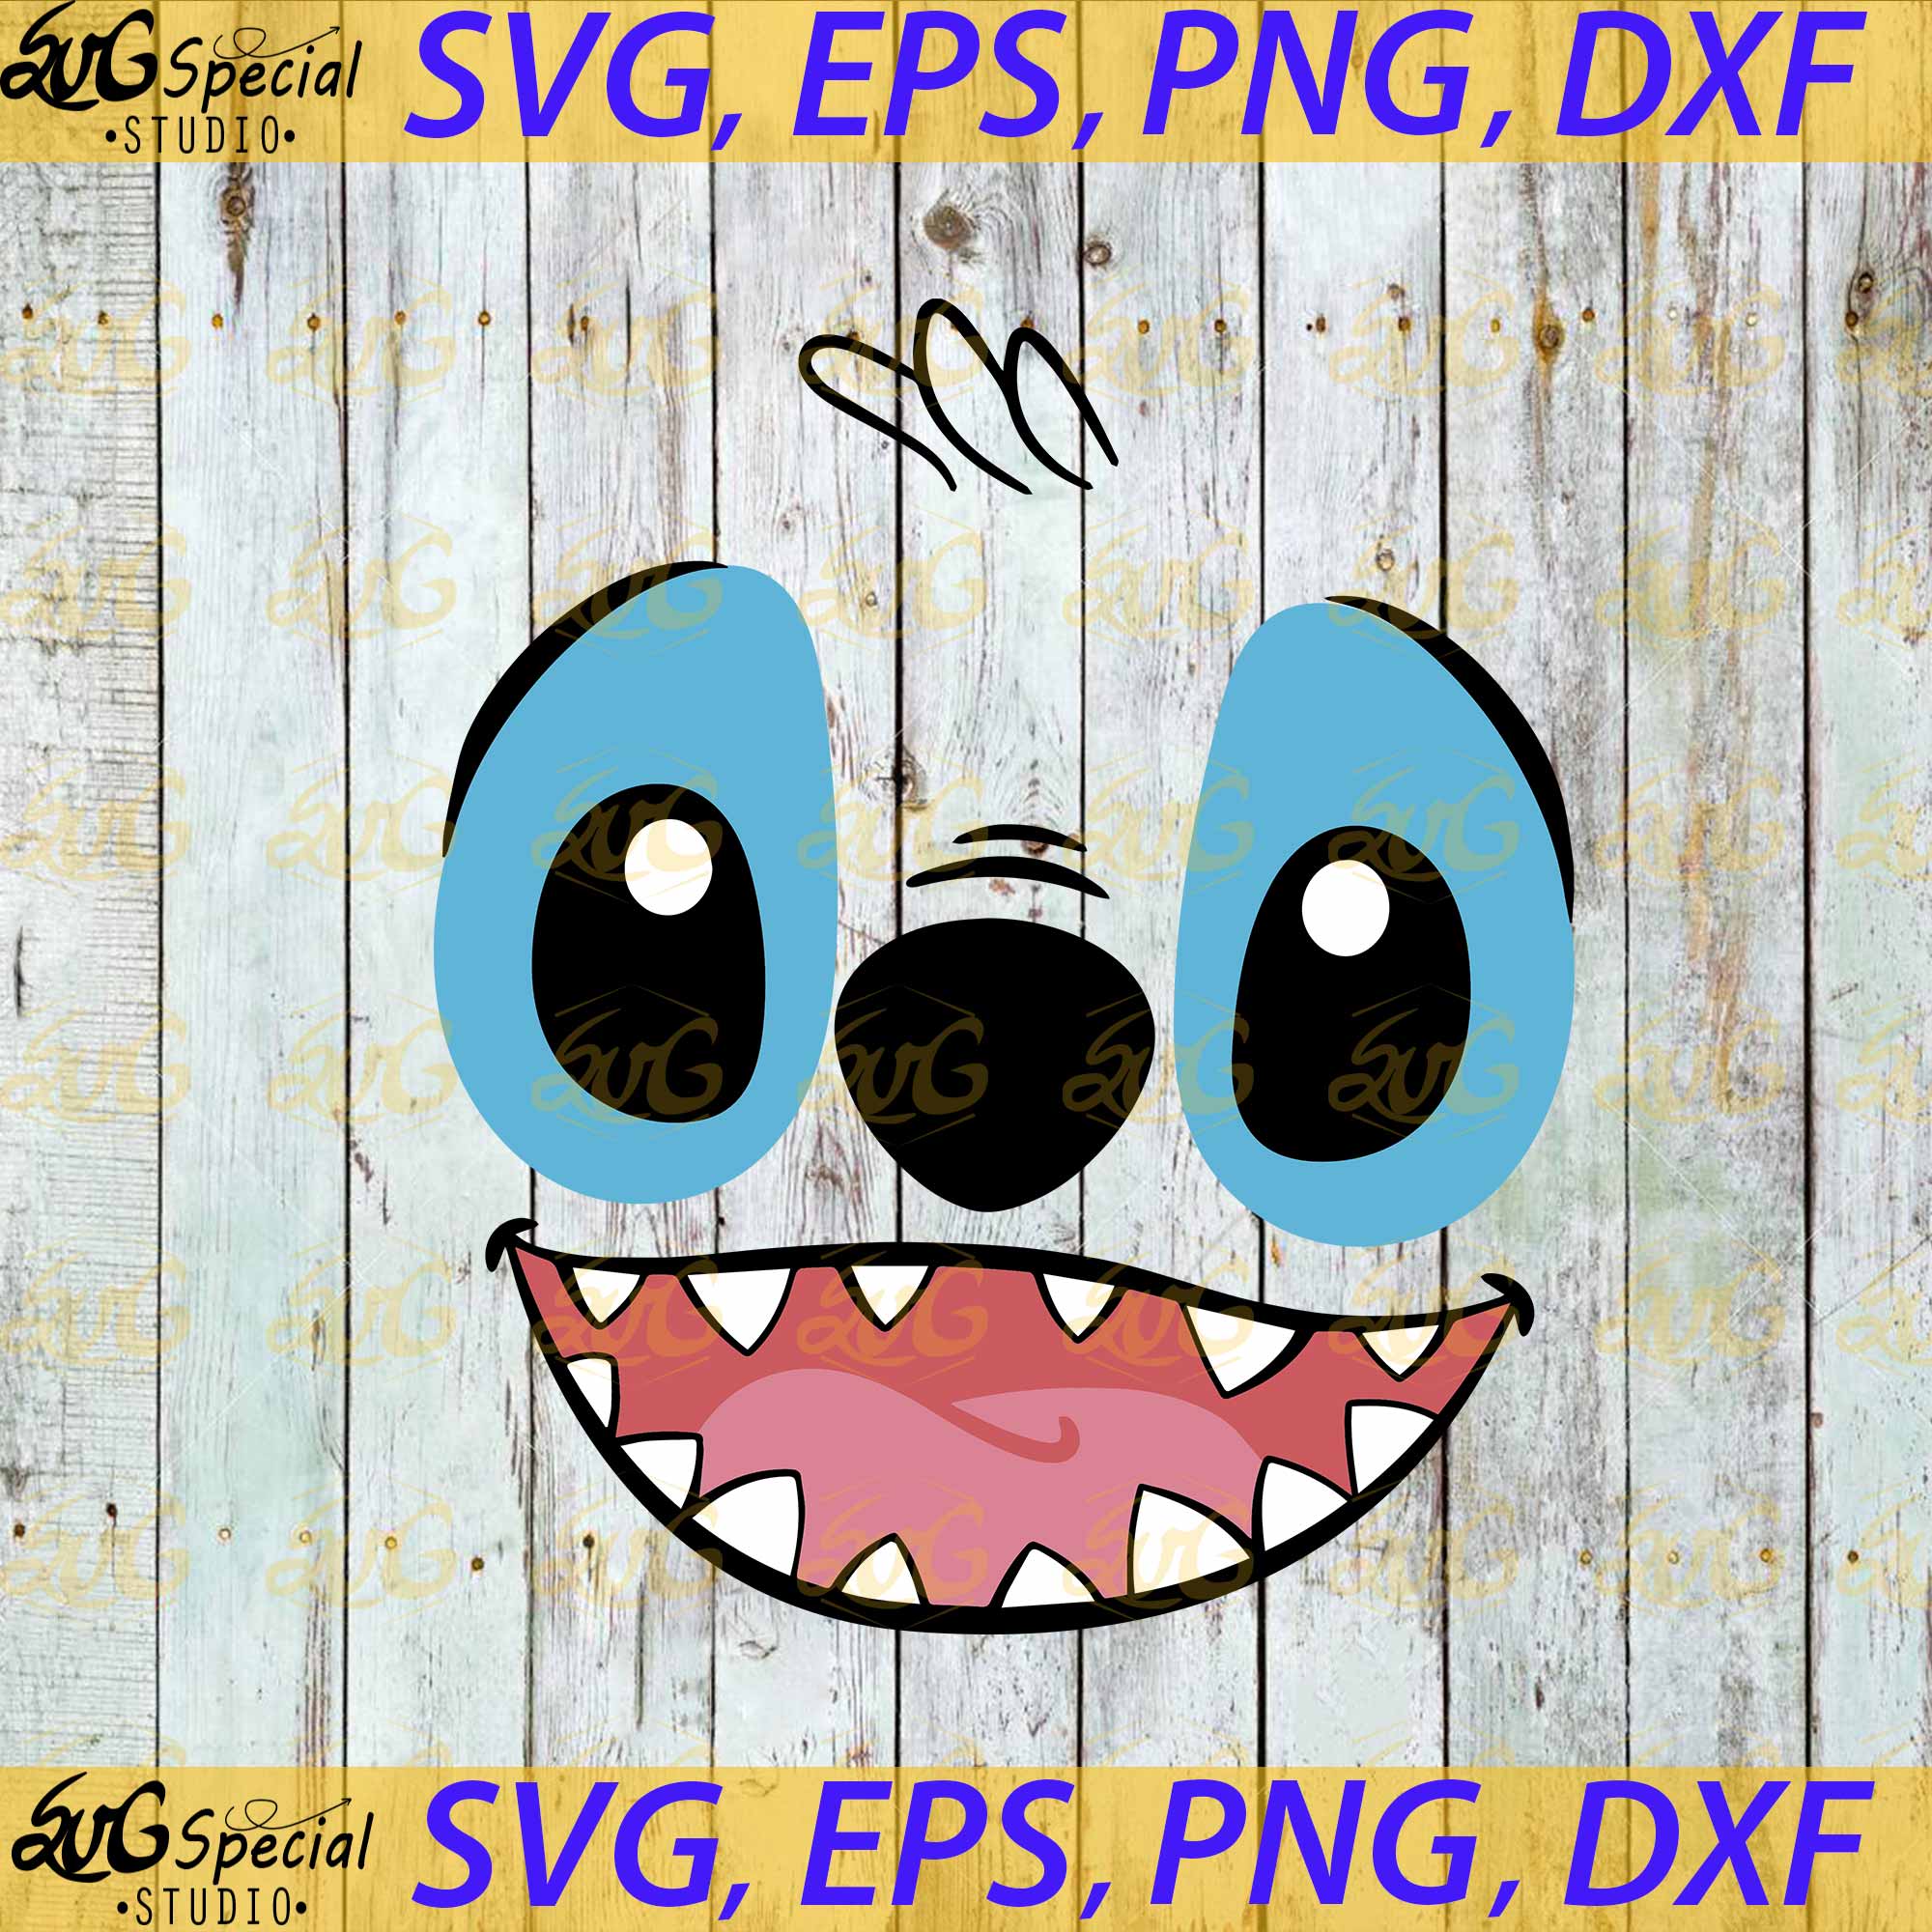 Stitch Birthday SVG dxf png clipart , cut file layered by color